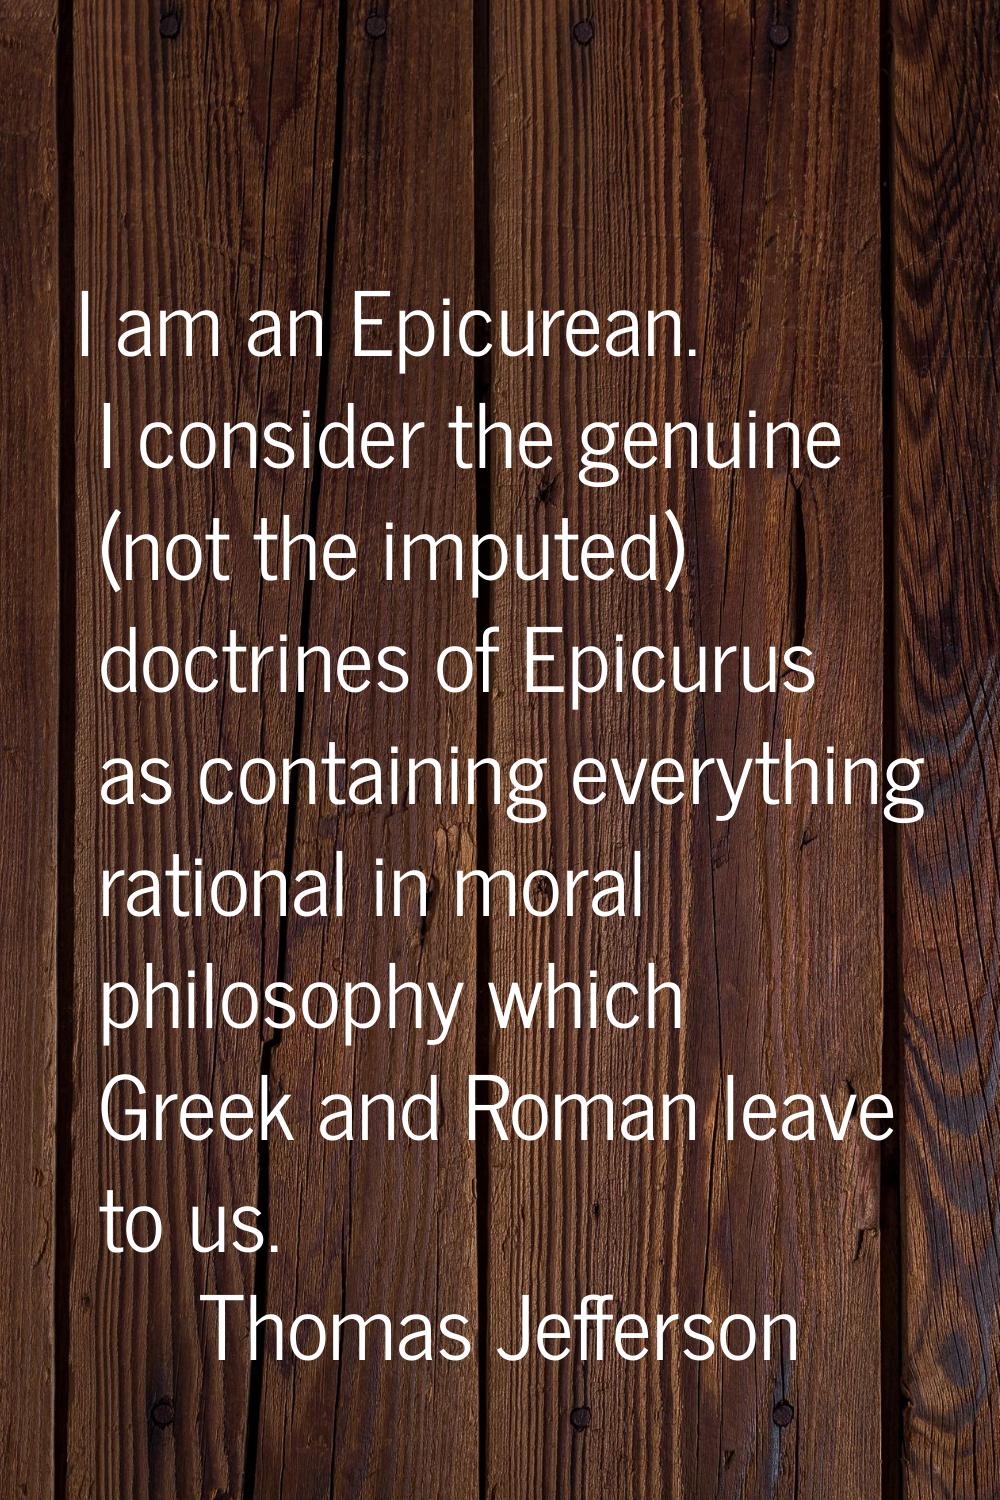 I am an Epicurean. I consider the genuine (not the imputed) doctrines of Epicurus as containing eve